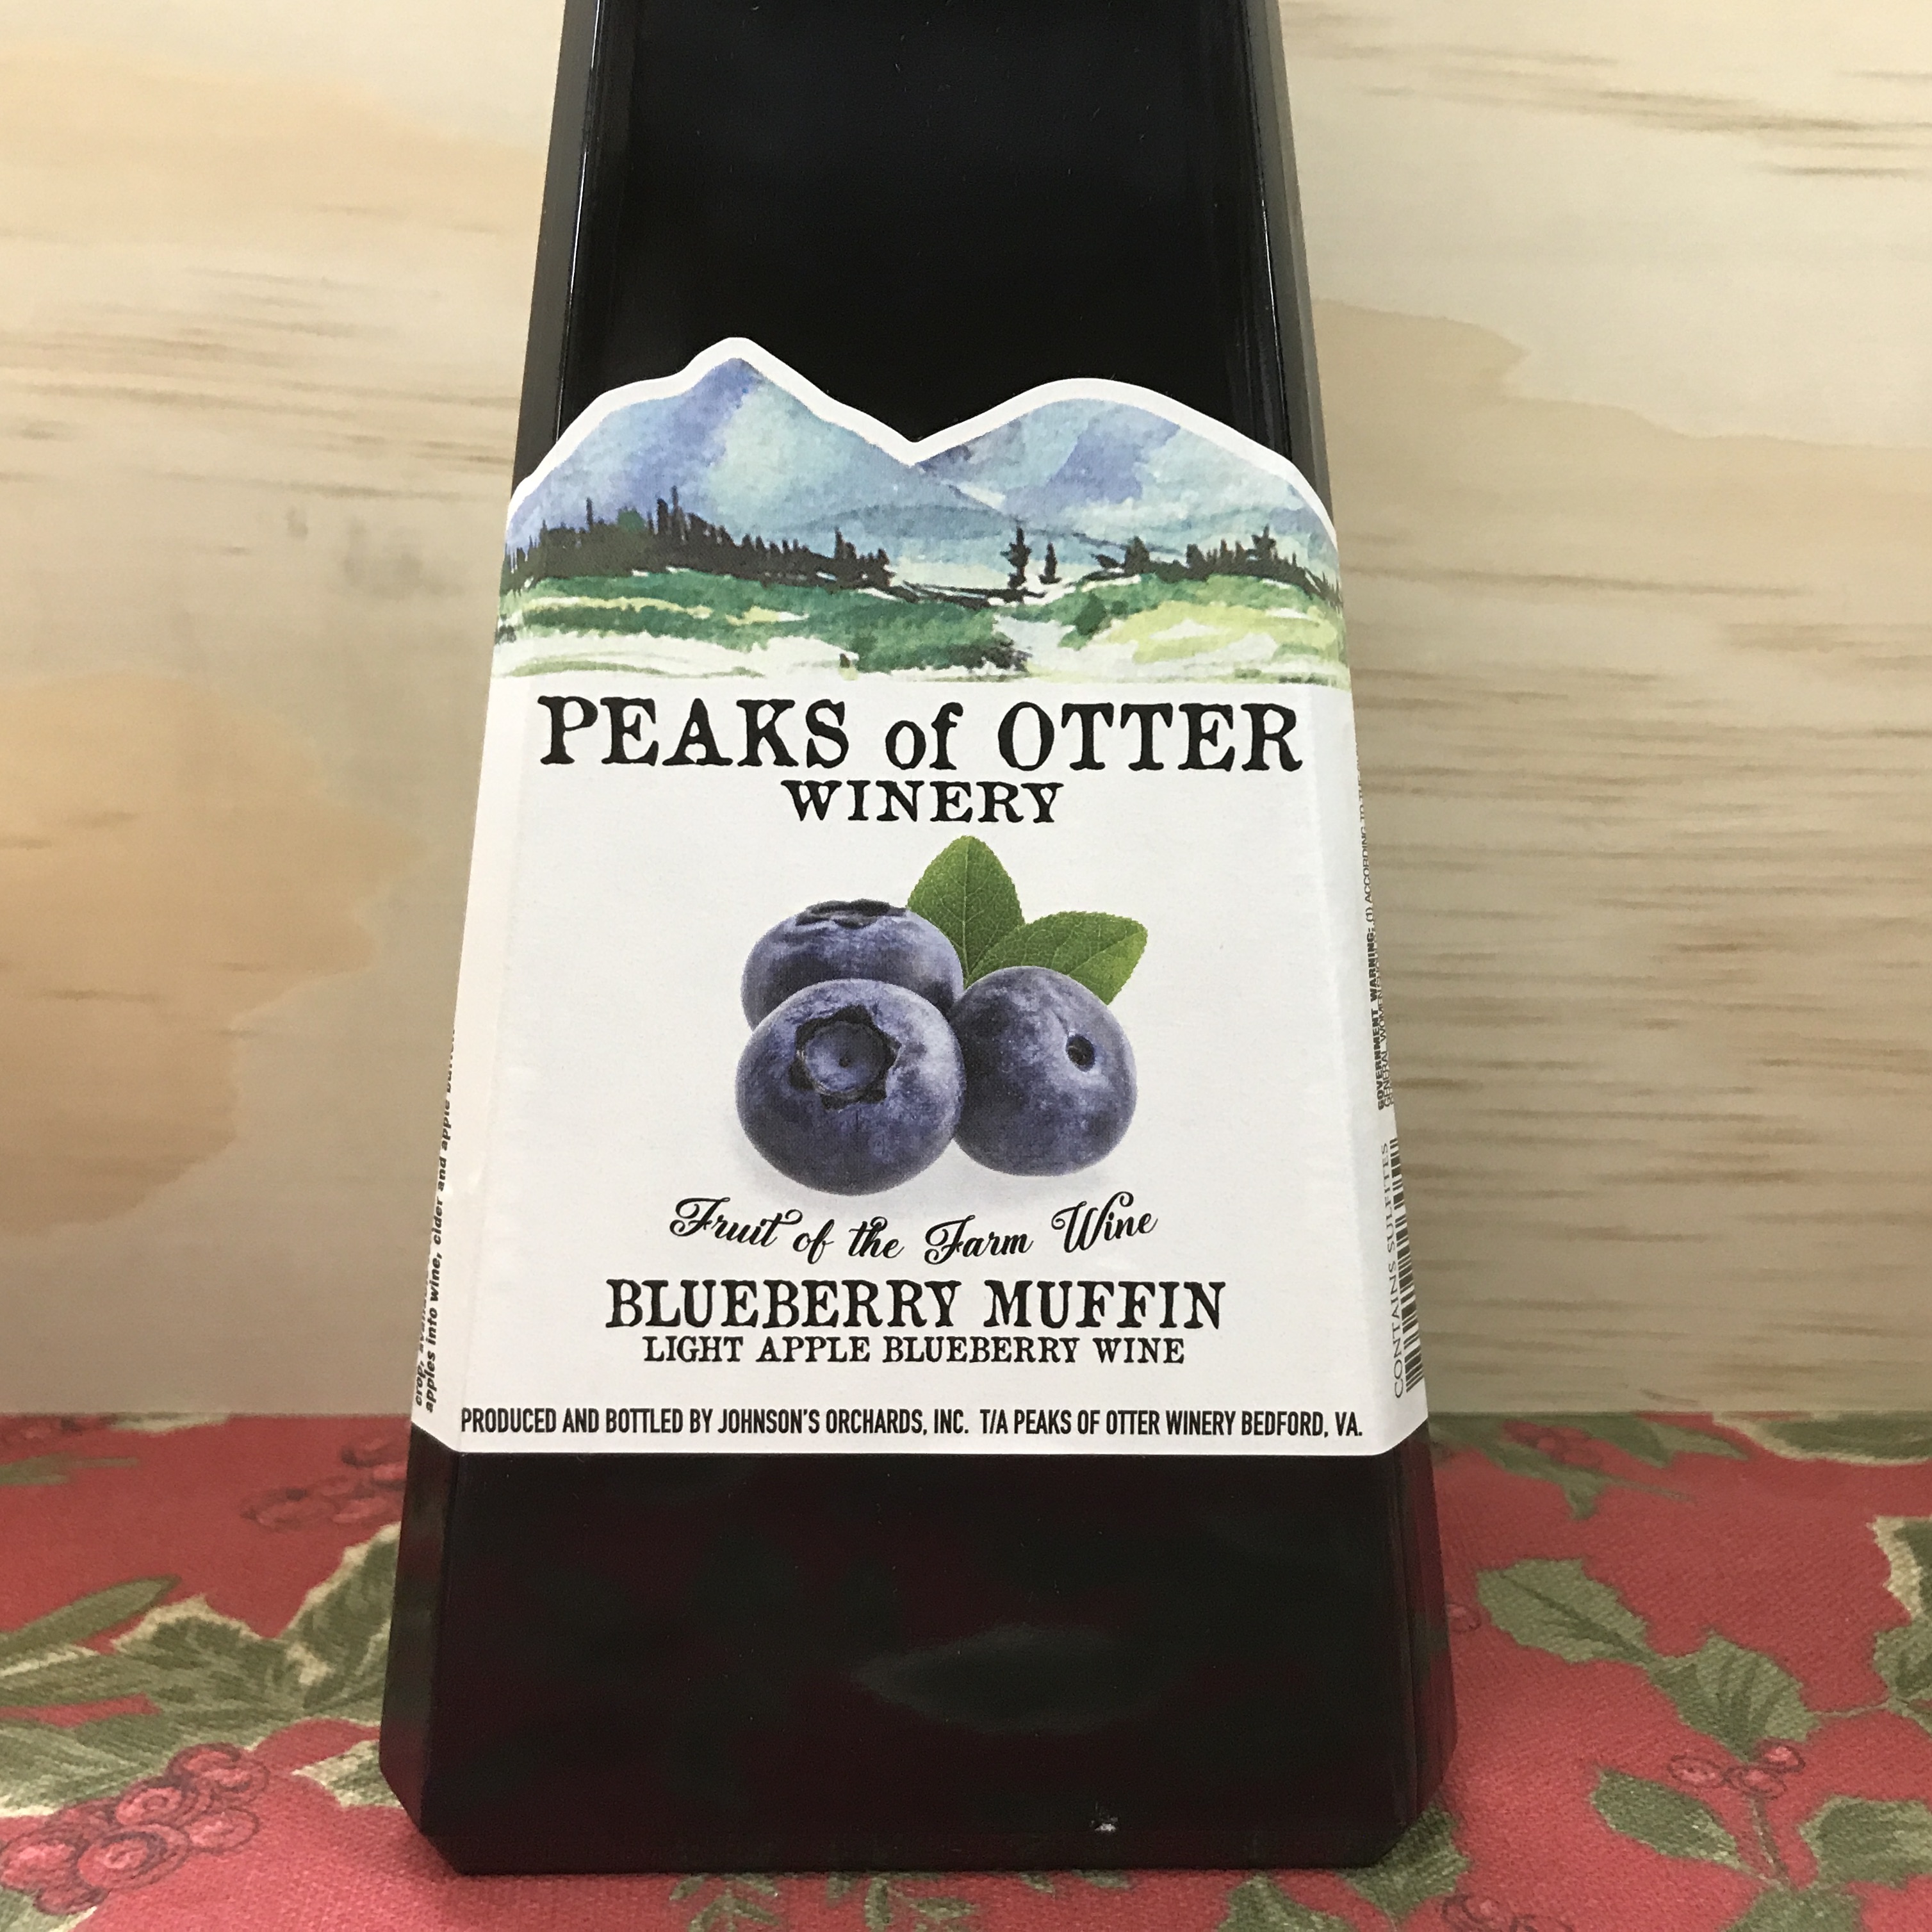 Peaks of Otter Blueberry Muffin Apple Blueberry wine